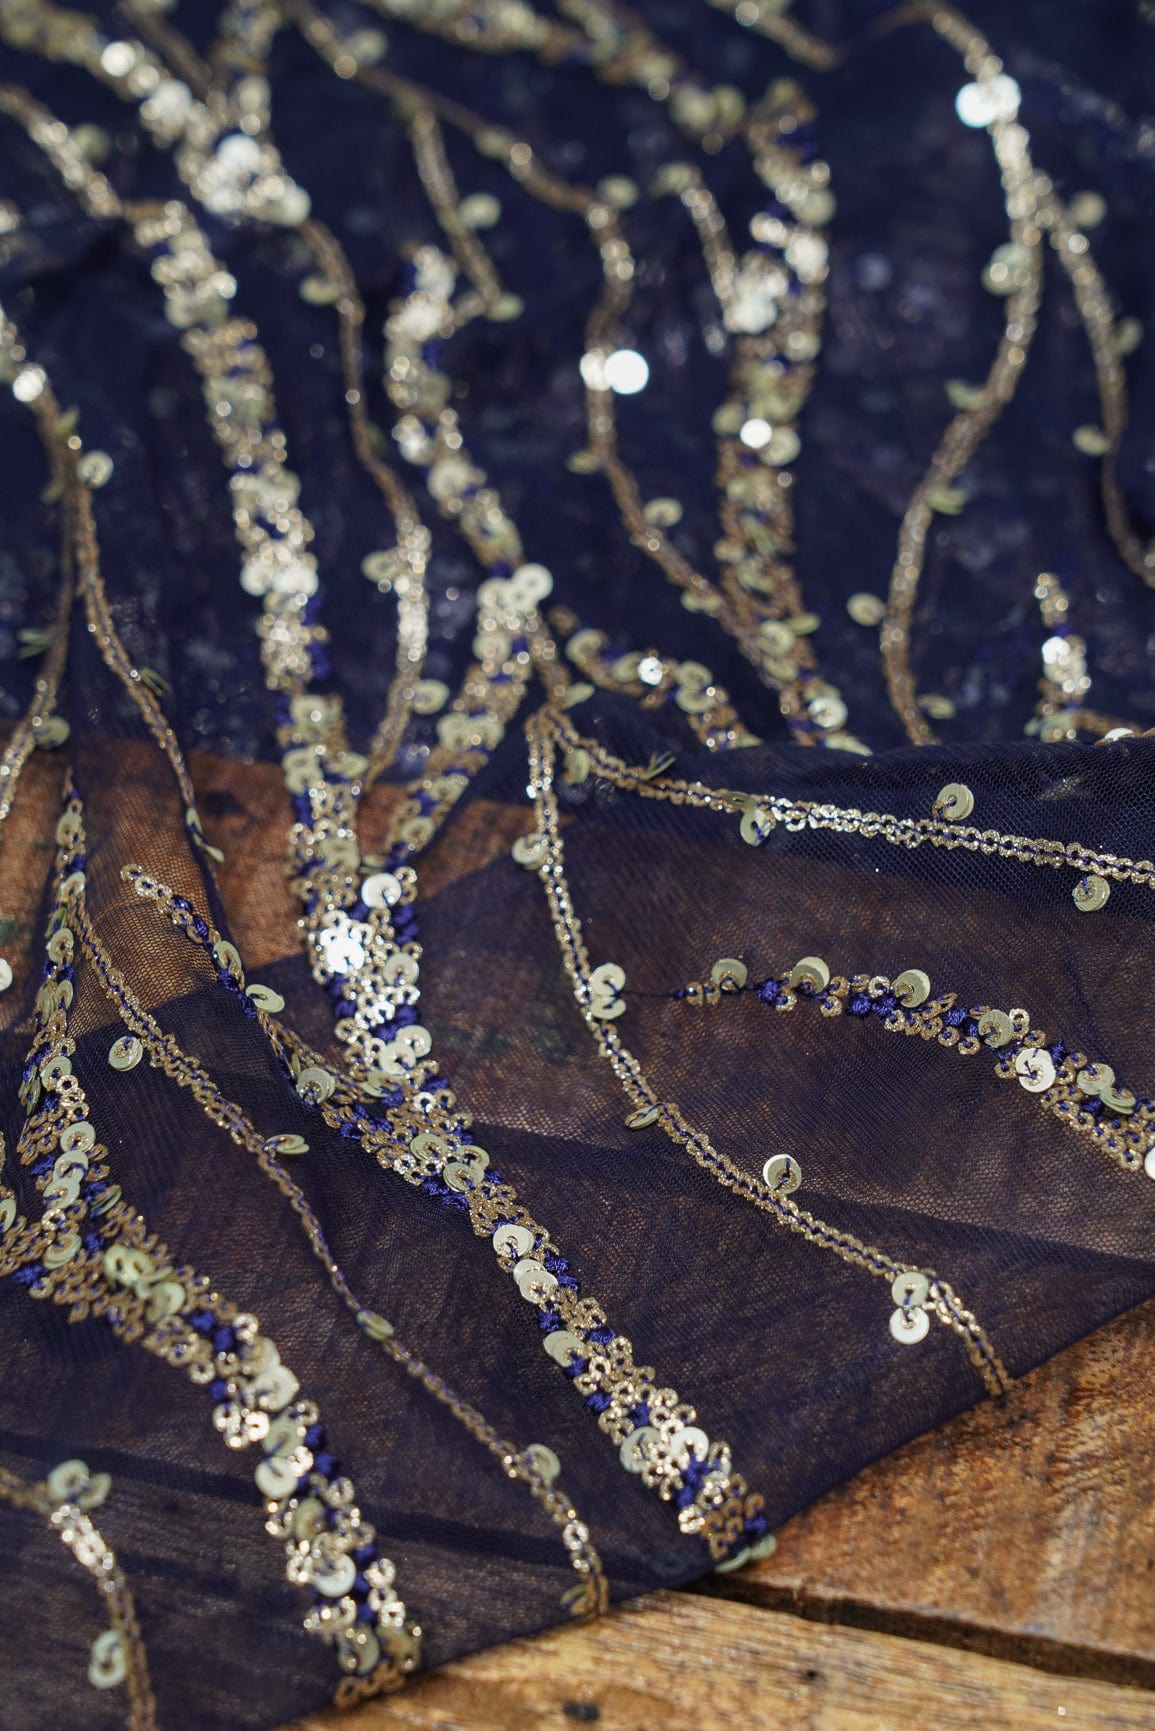 doeraa Embroidery Fabrics Gold Sequins With Navy Blue Thread Embroidery On Navy Blue Soft Net